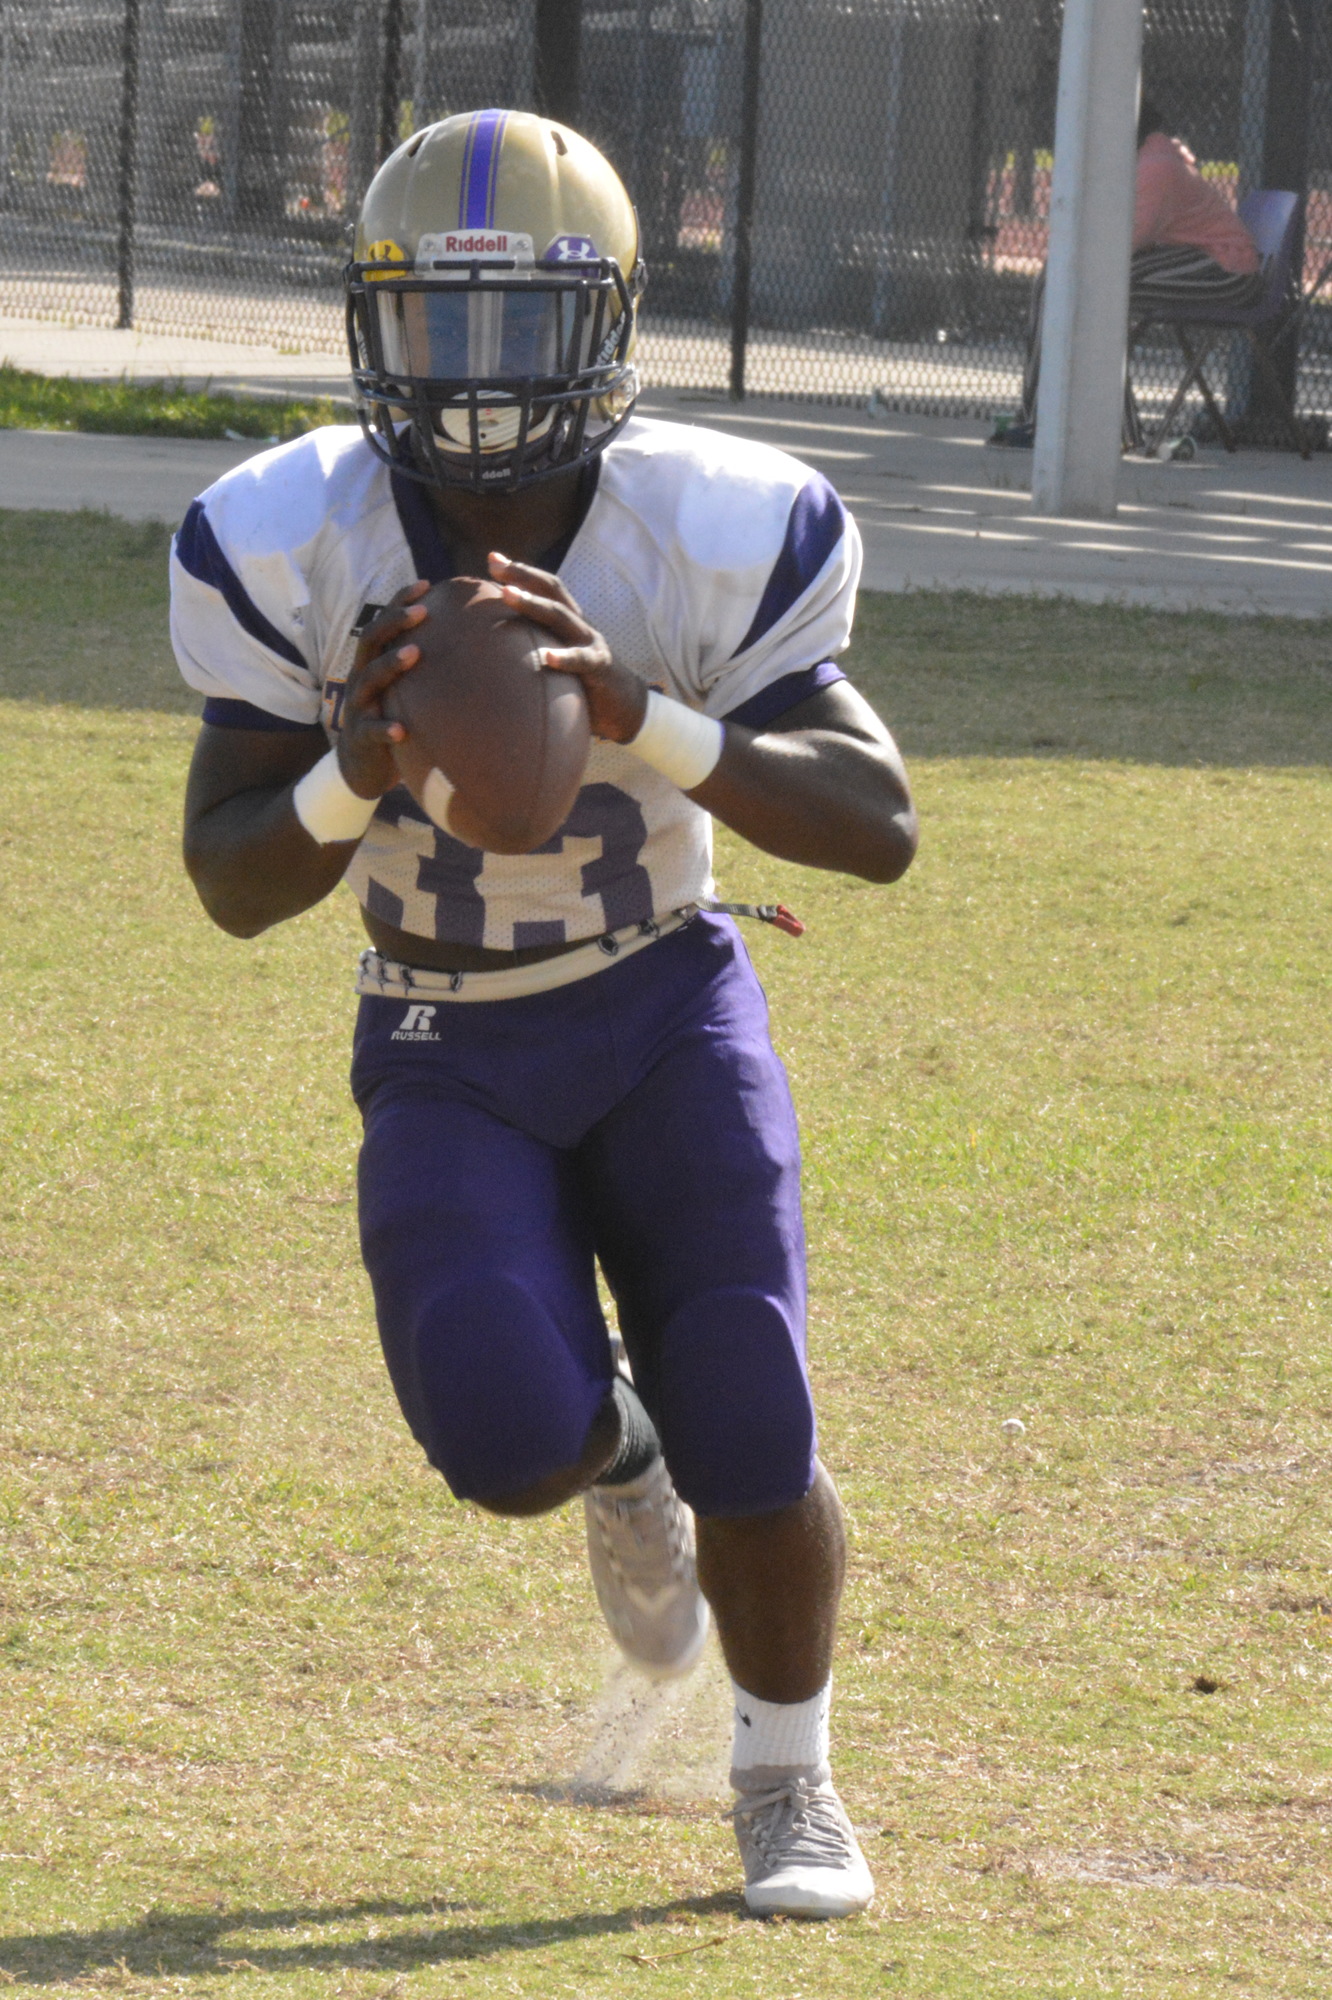 Booker High freshman Cleve Benson runs the option during practice on Oct. 16. He'll start at QB for the Tornadoes on Friday against Lemon Bay High.